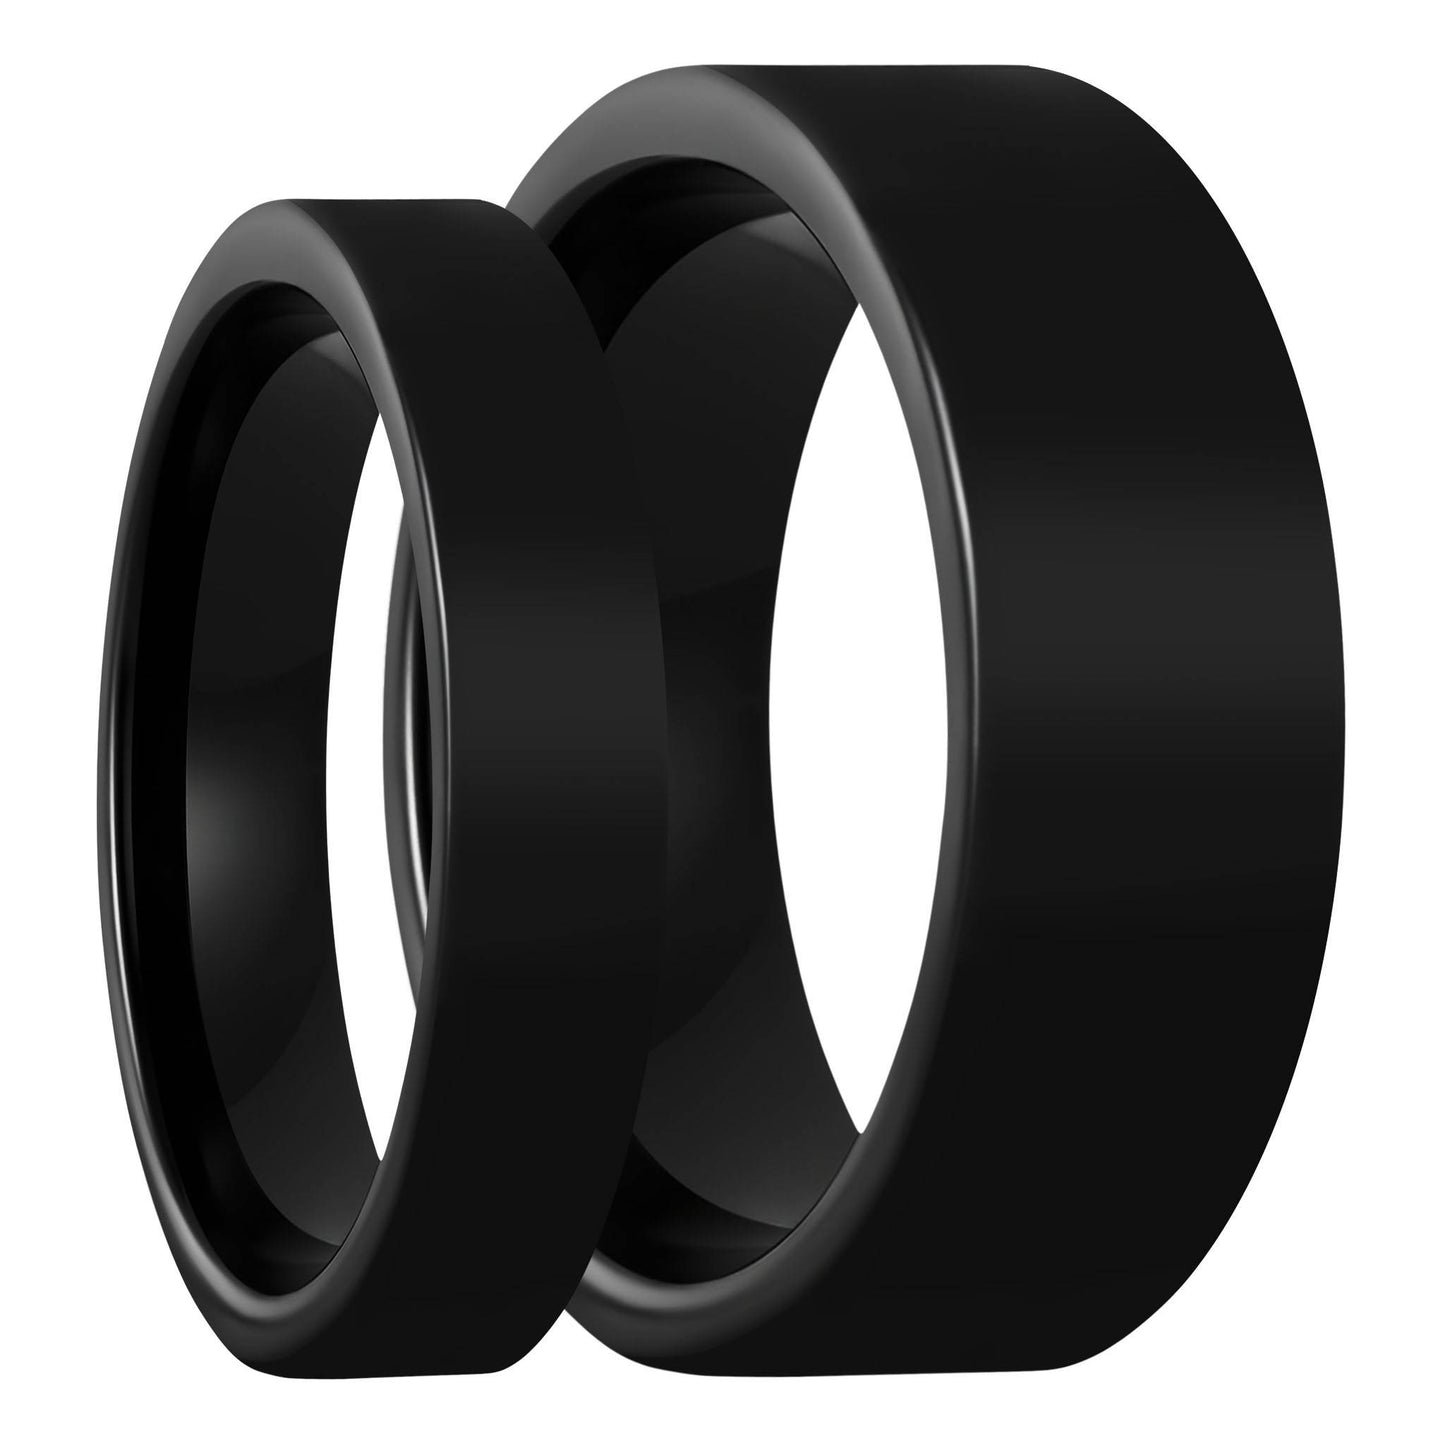 Silicone Wedding Rings: A Modern Symbol of Love and Versatility